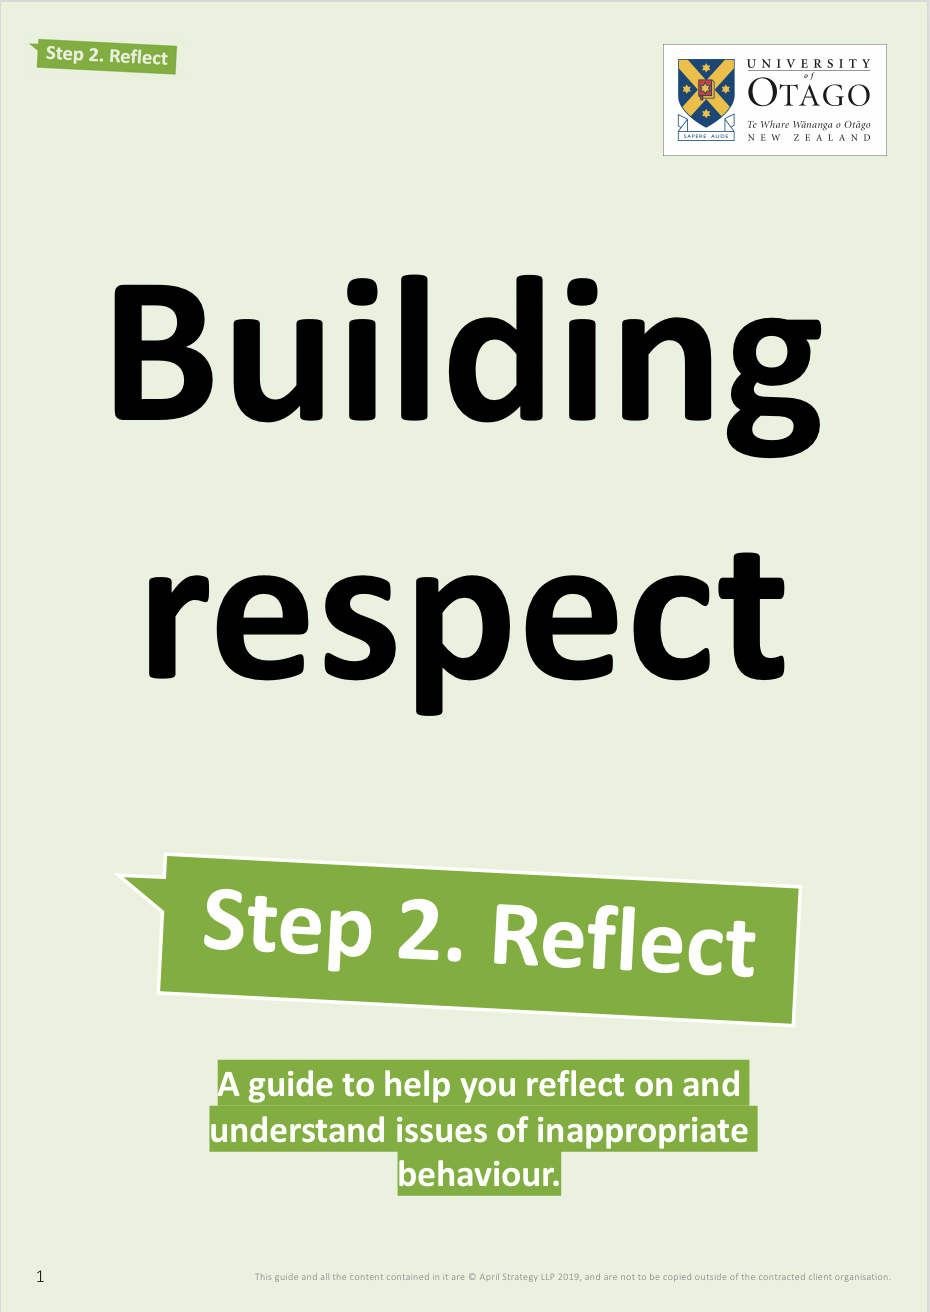 Step 2. Reflect guide